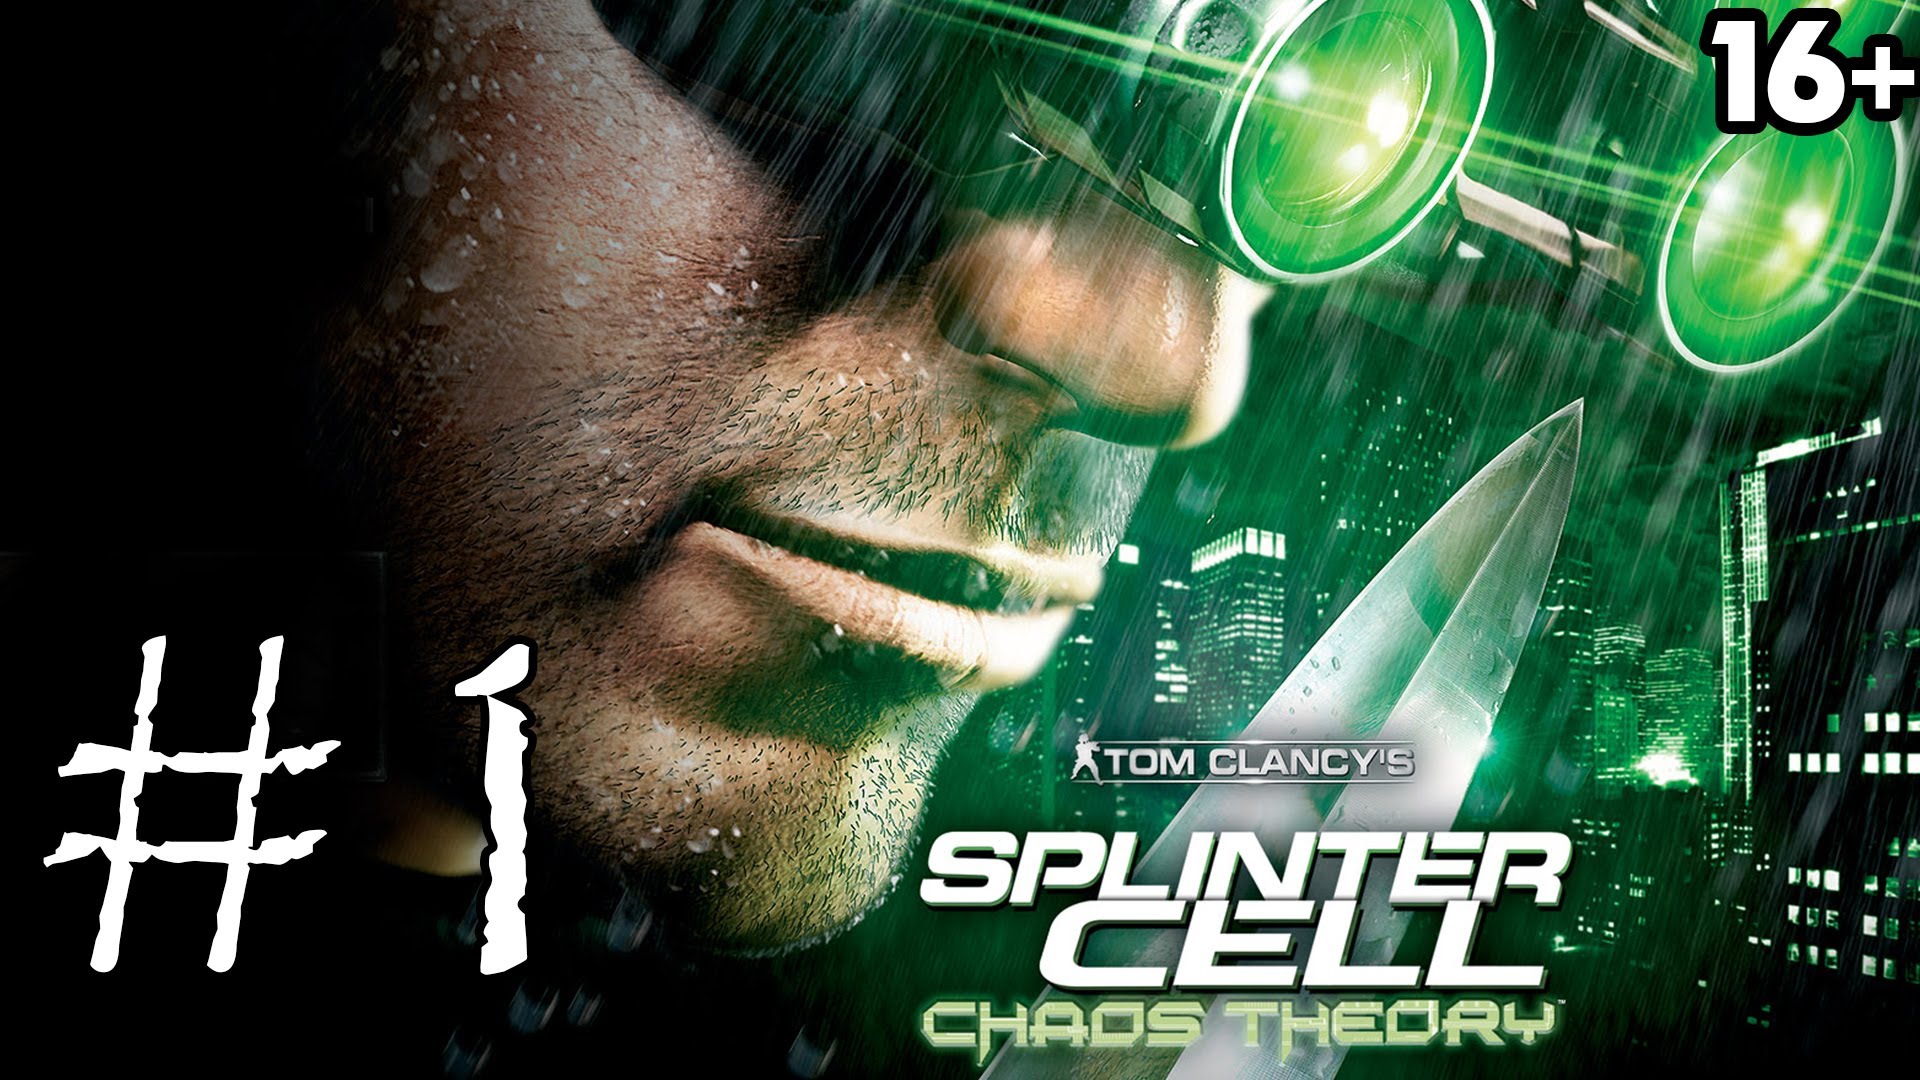 Tom Clancy's Splinter Cell: Chaos Theory #15